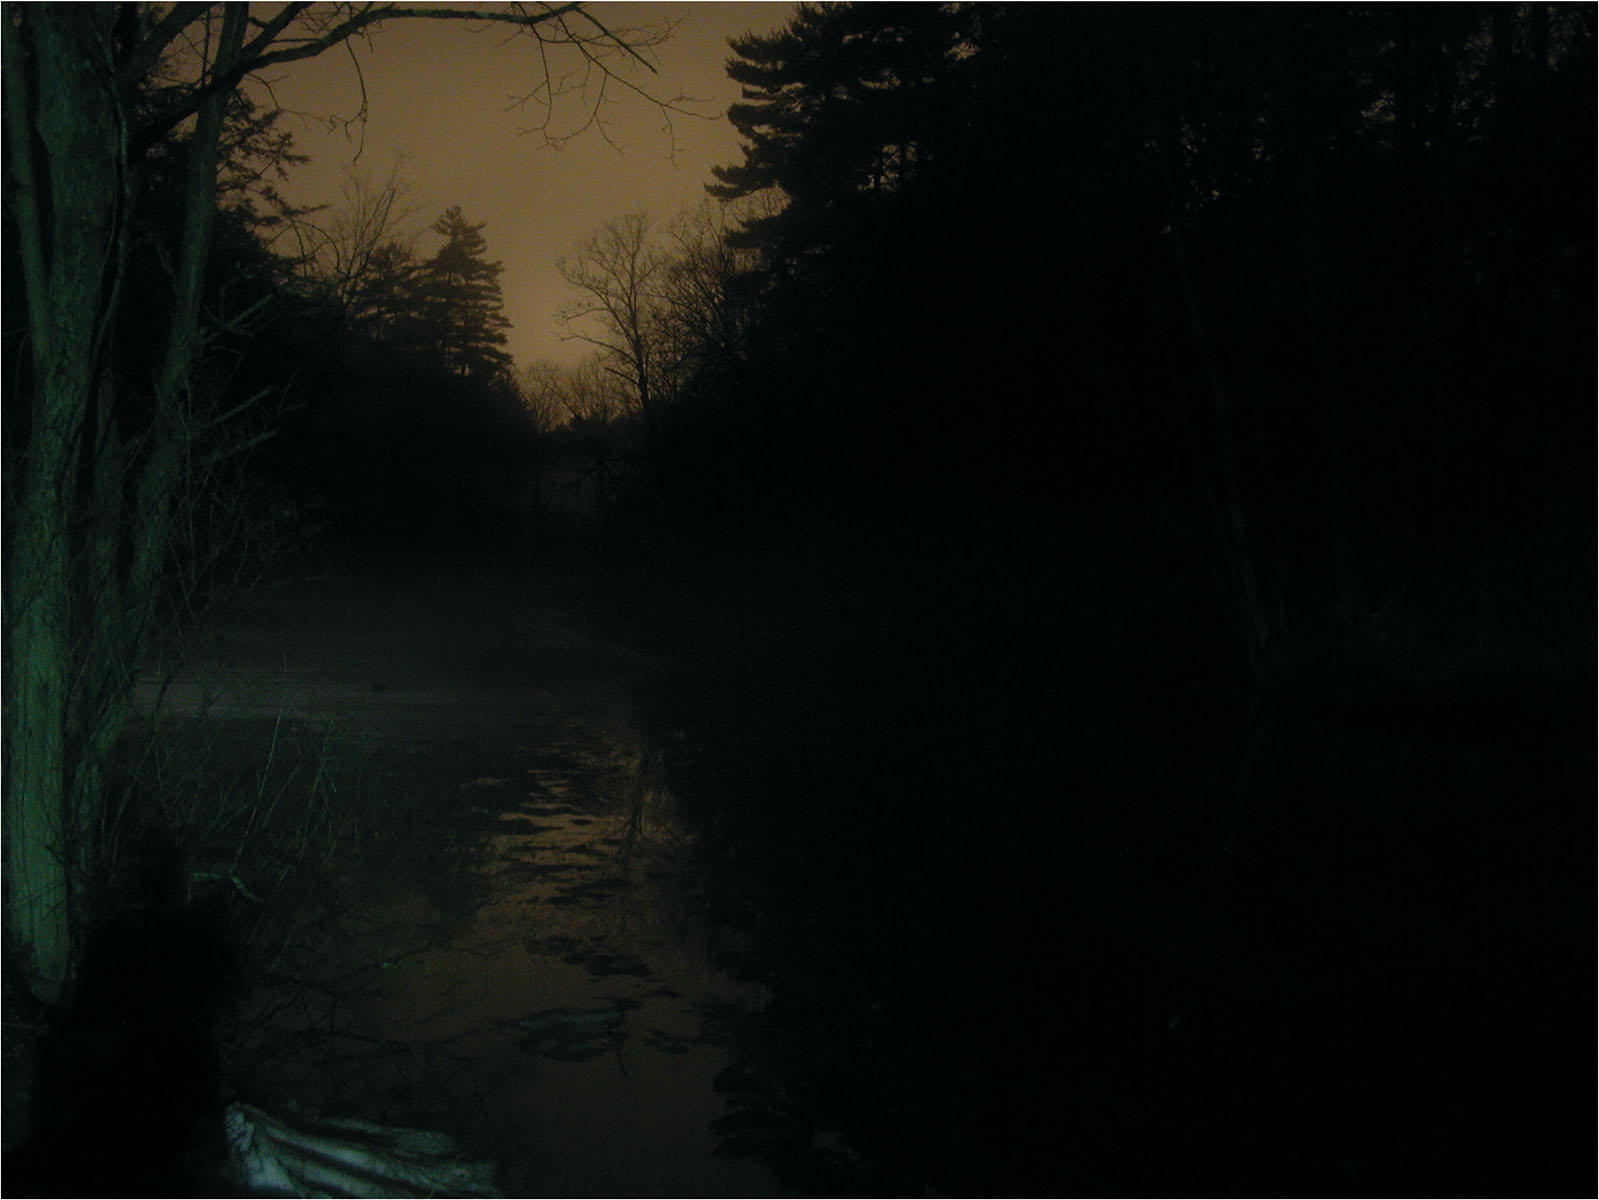 An Eerie Night in Winter: Pond and Tree